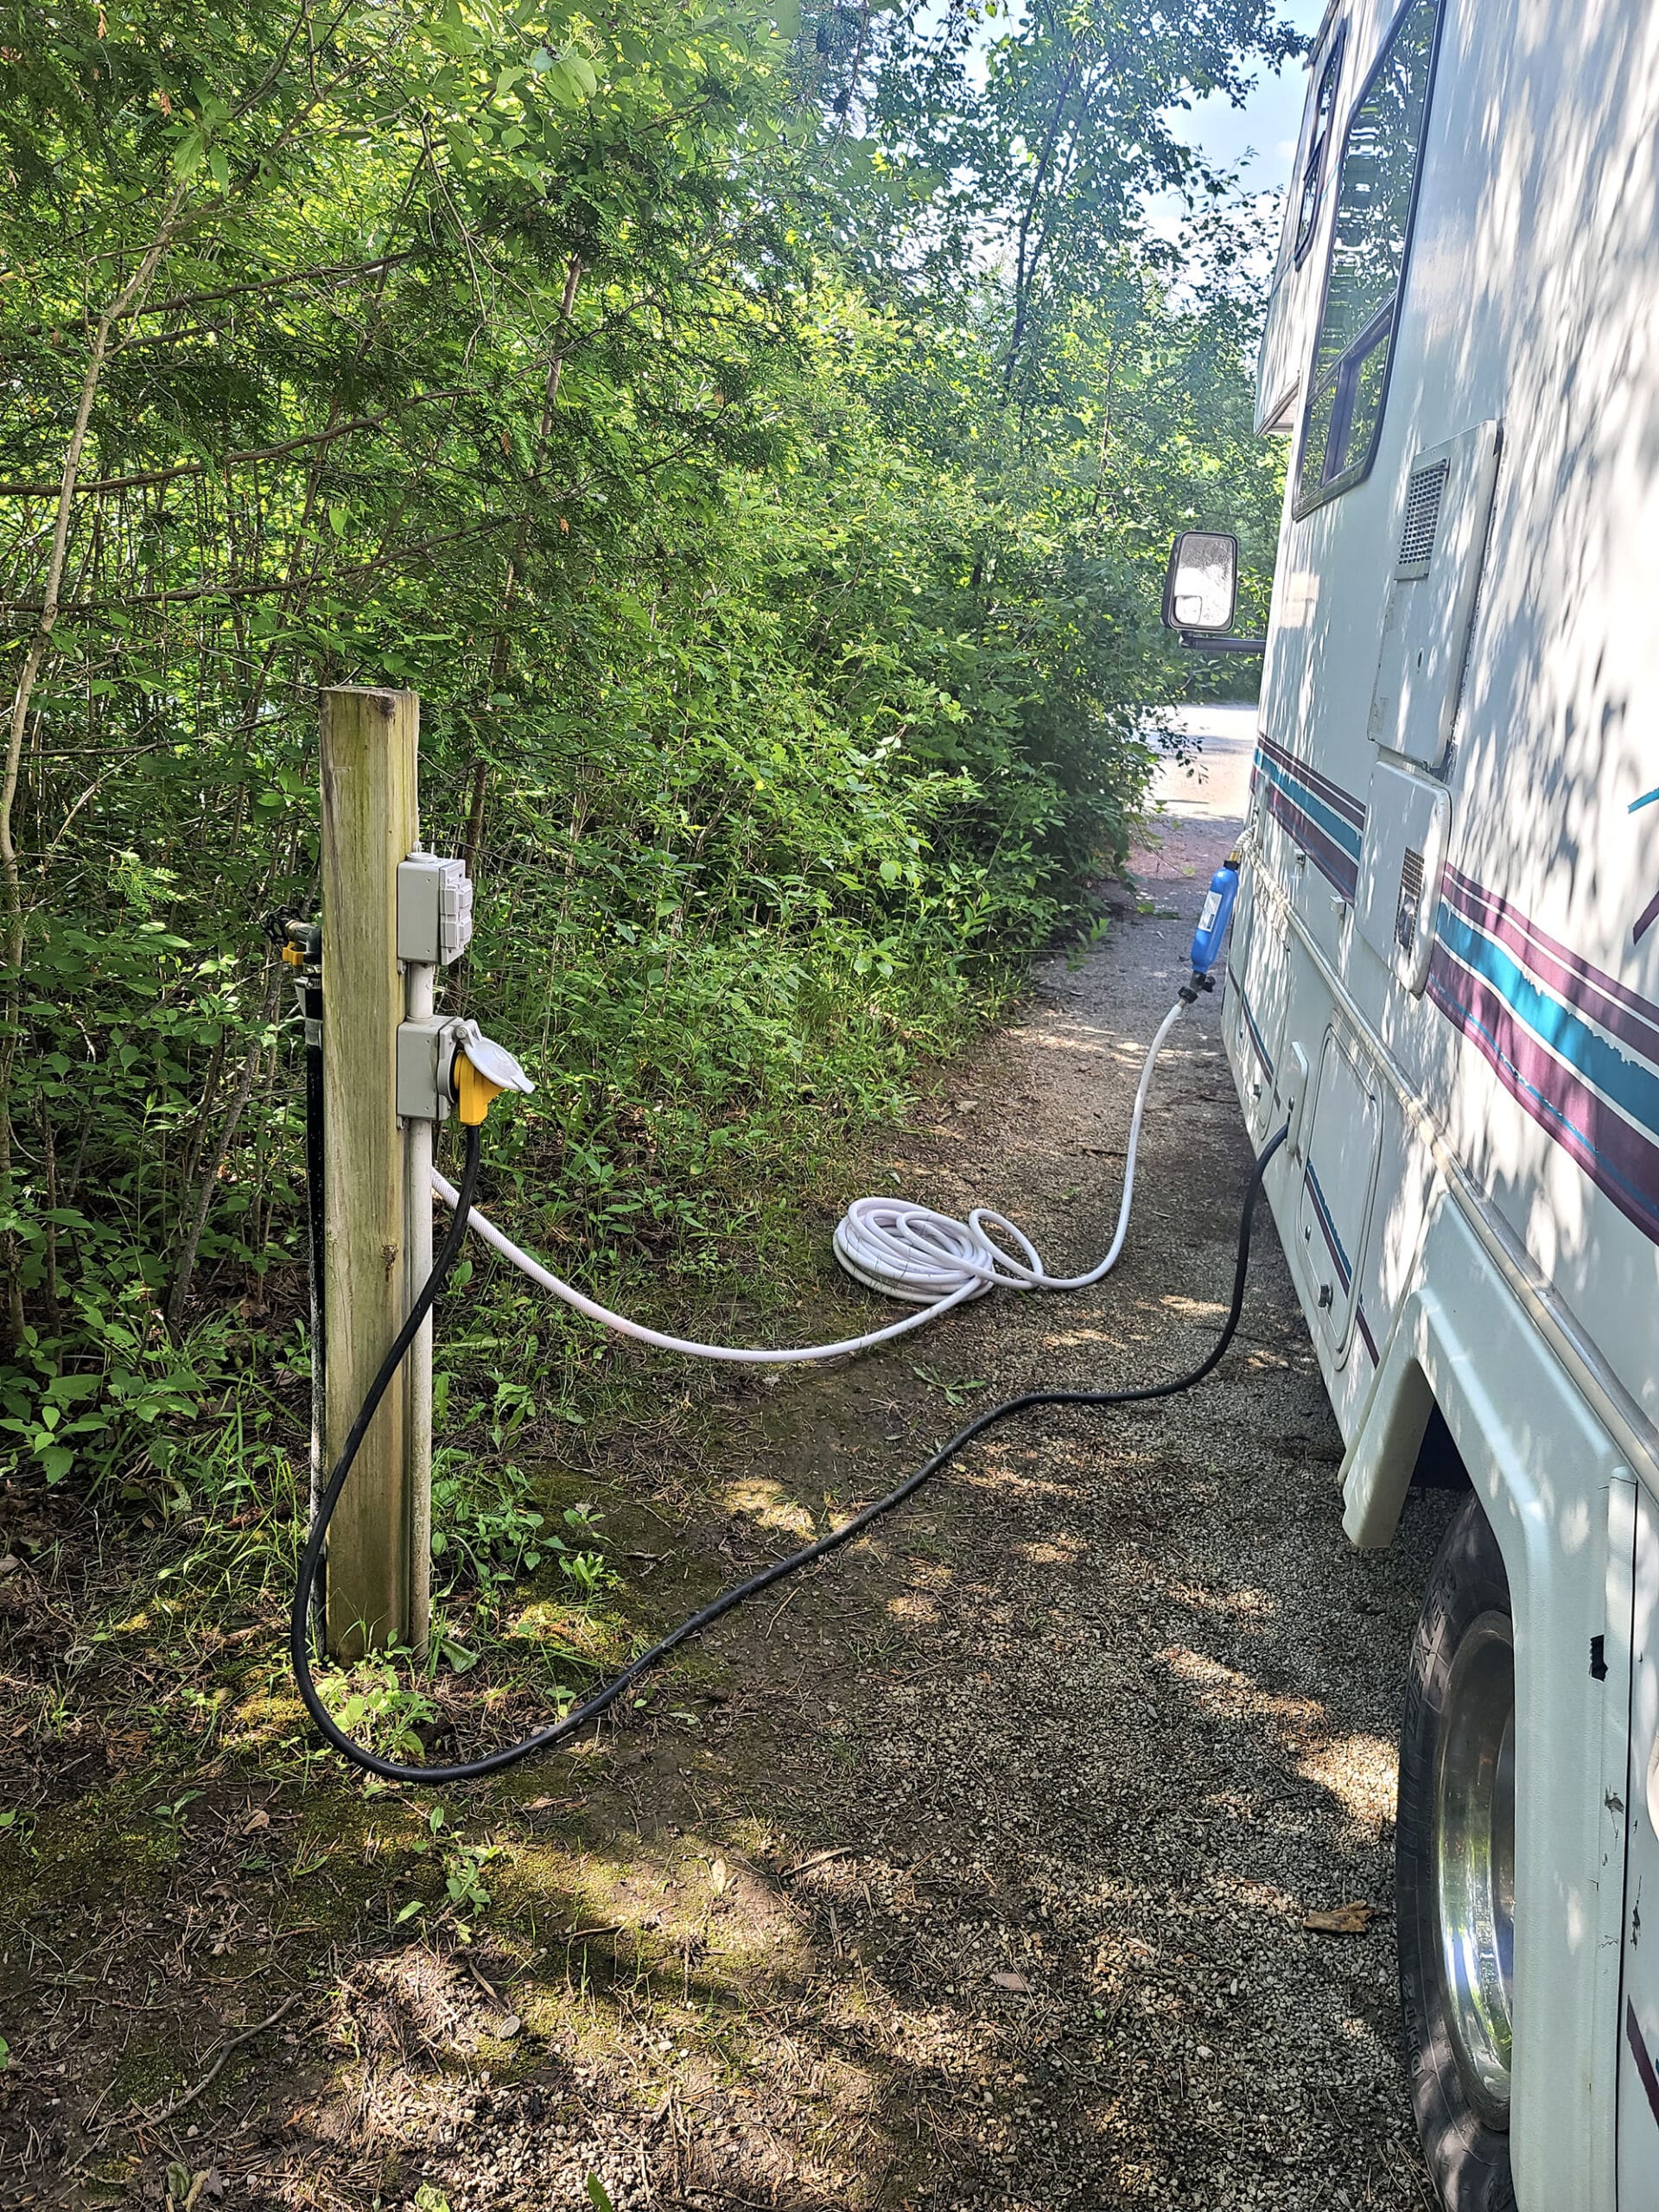 The back side of a motorhome, next to a post with power and water hookups.  A cord and hose are seen connected.